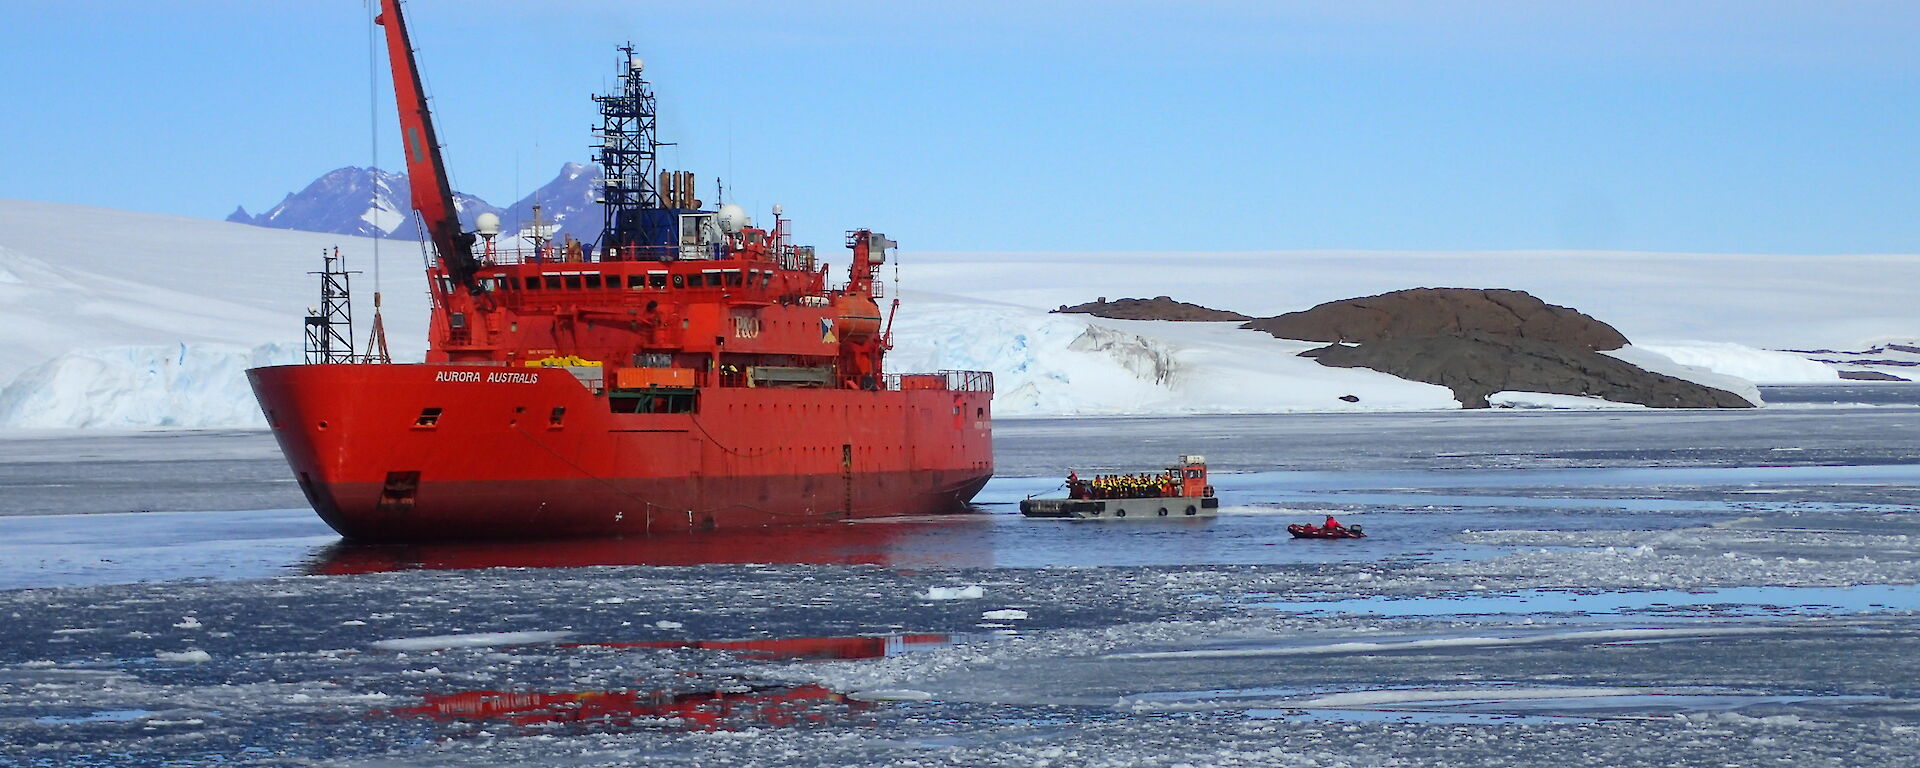 Incoming Mawson expeditioners transferring to shore via barge in Kista Strait